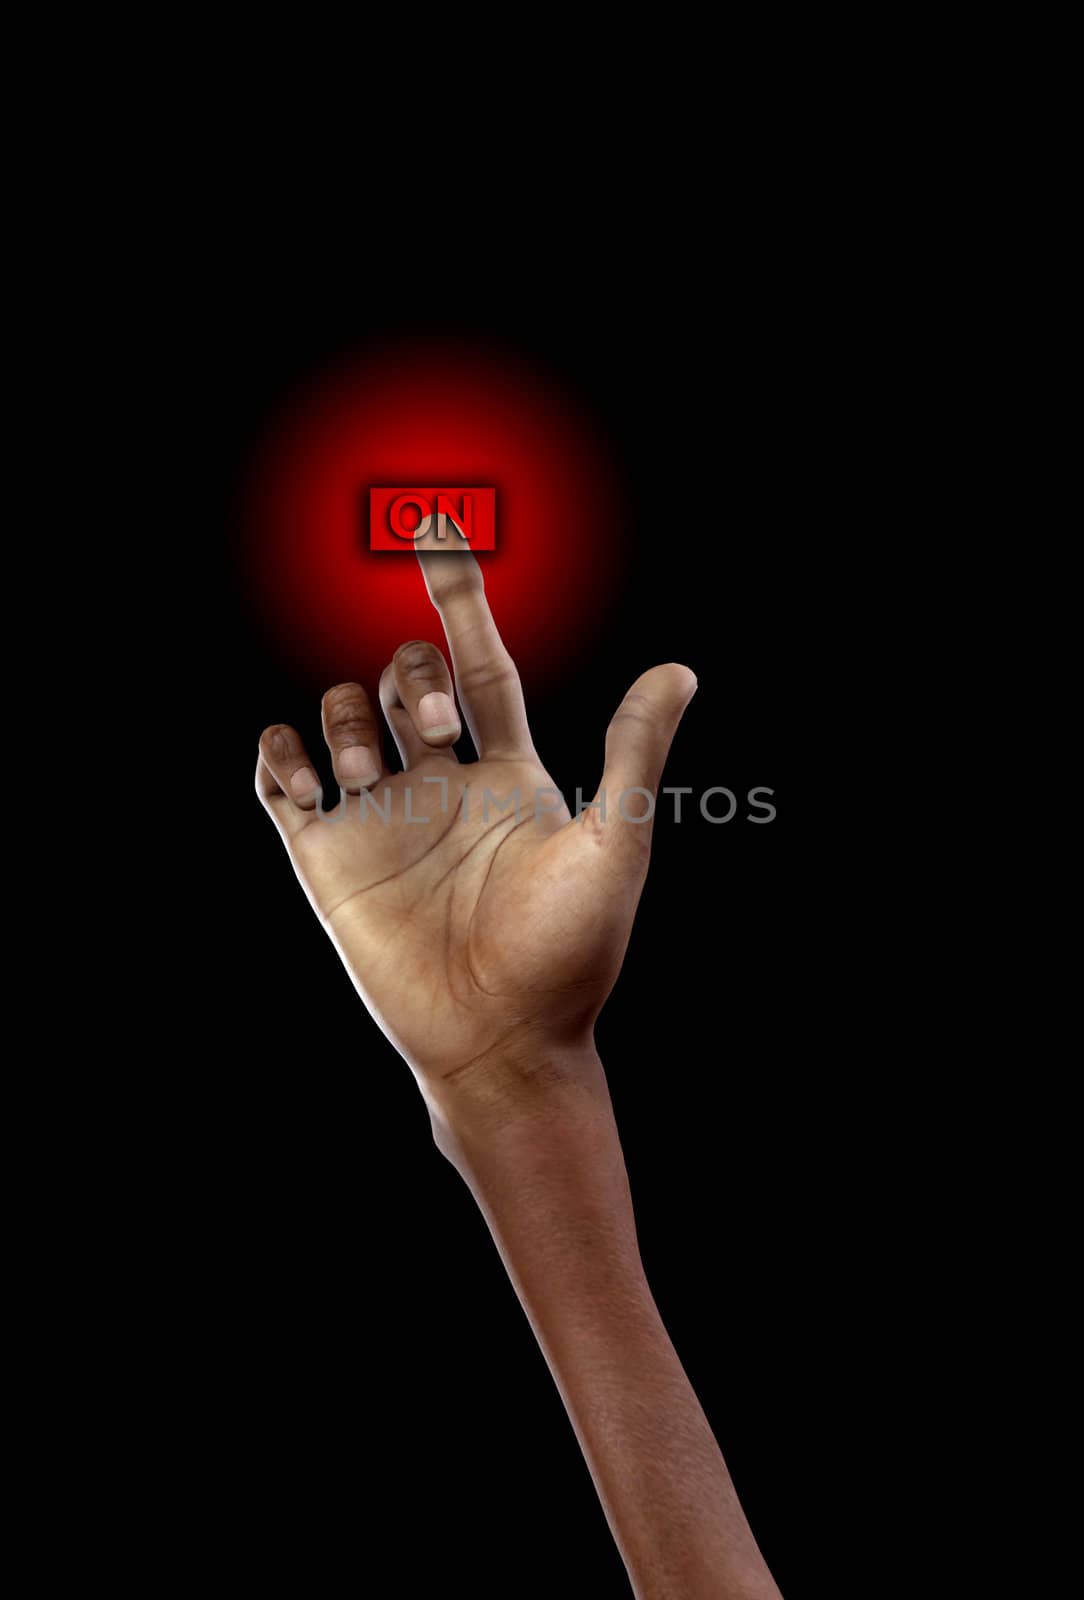 Conceptual image of a hand touching an on button.